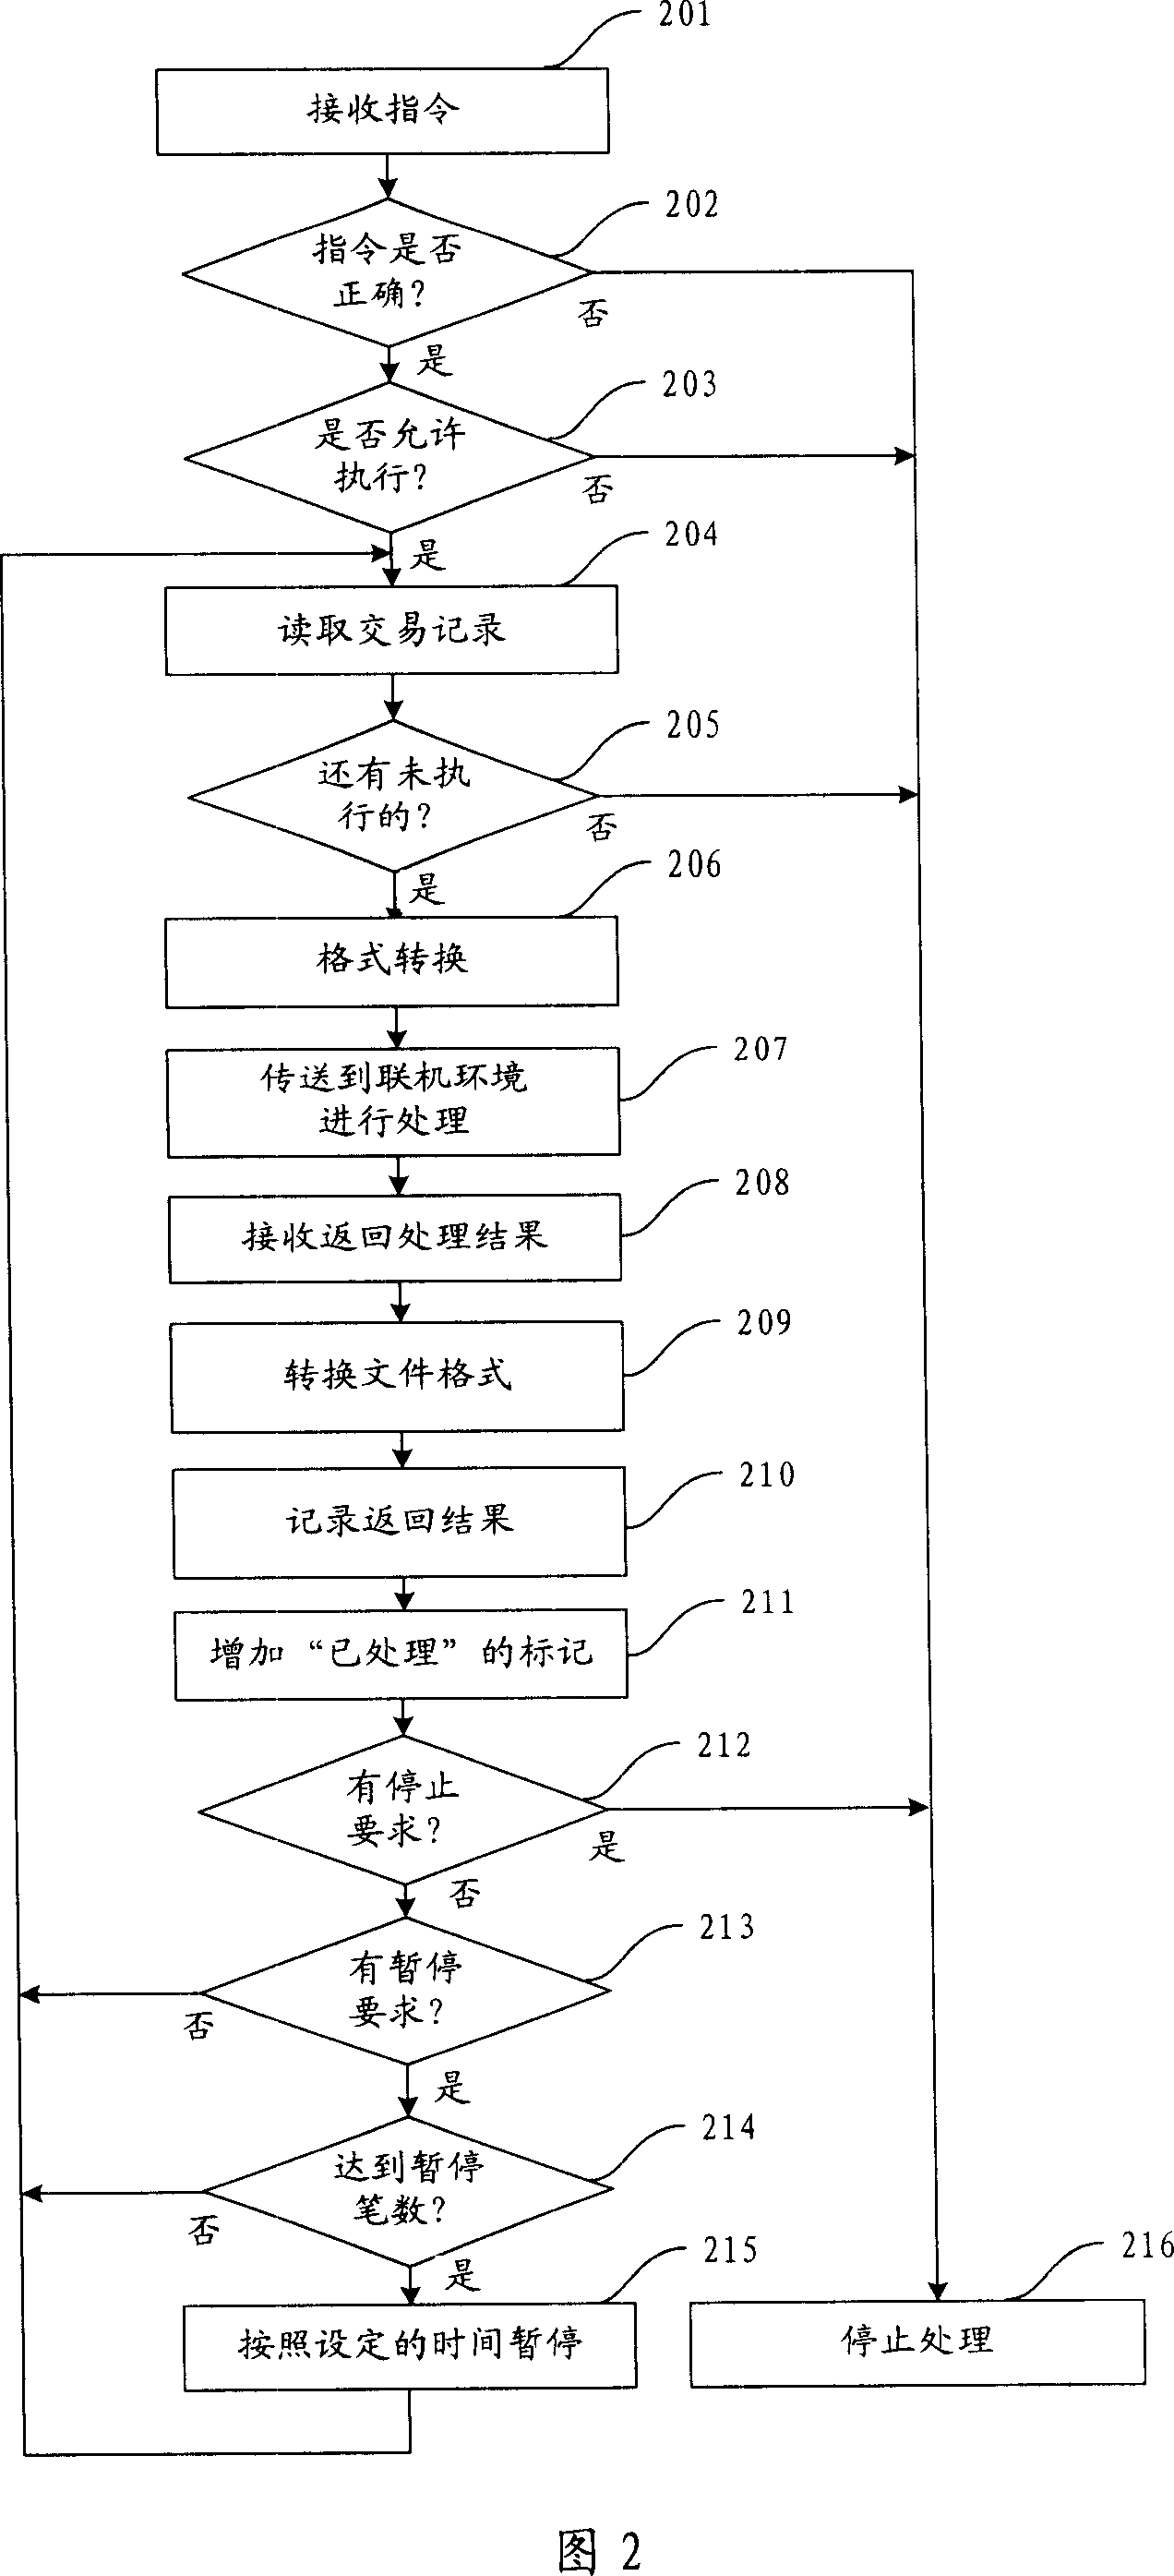 Method and device for executing batch processing job